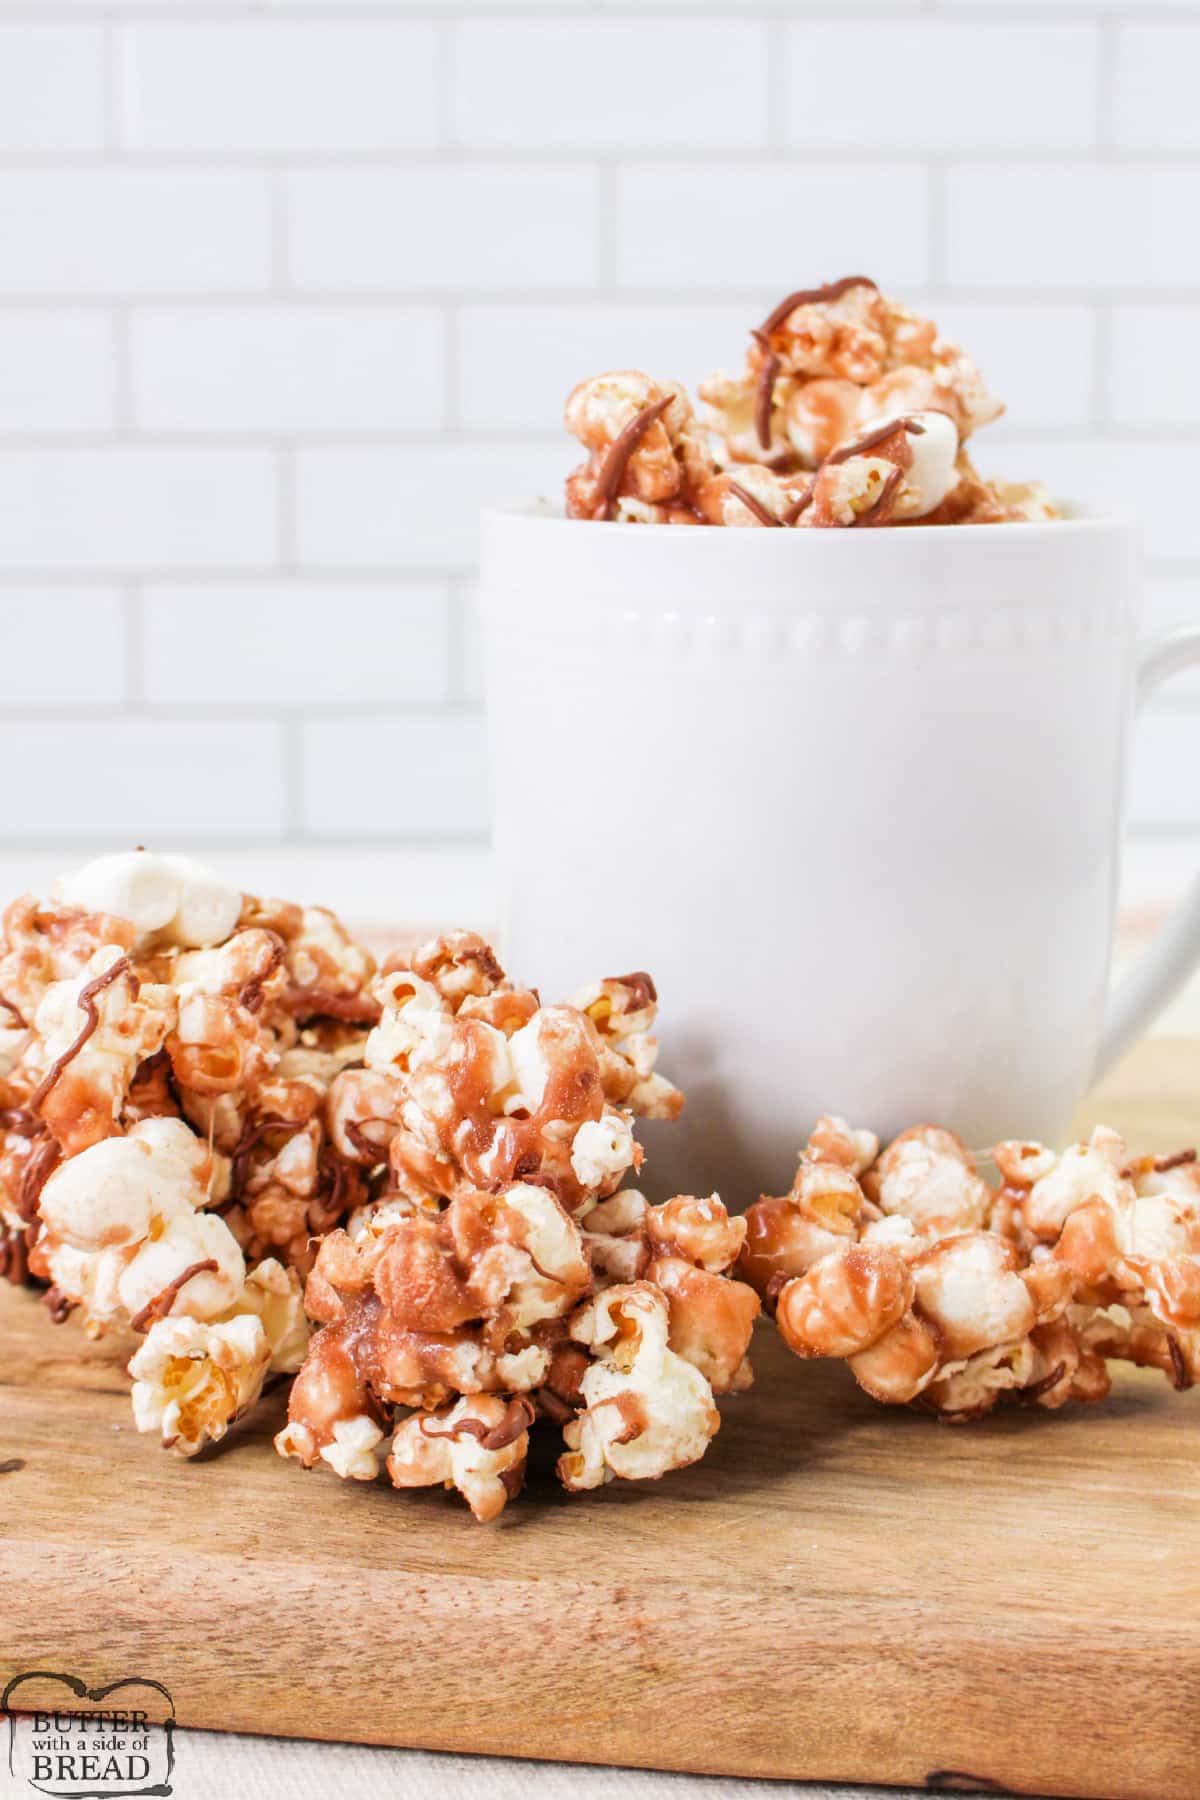 Popcorn coated with hot cocoa mix and marshmallows